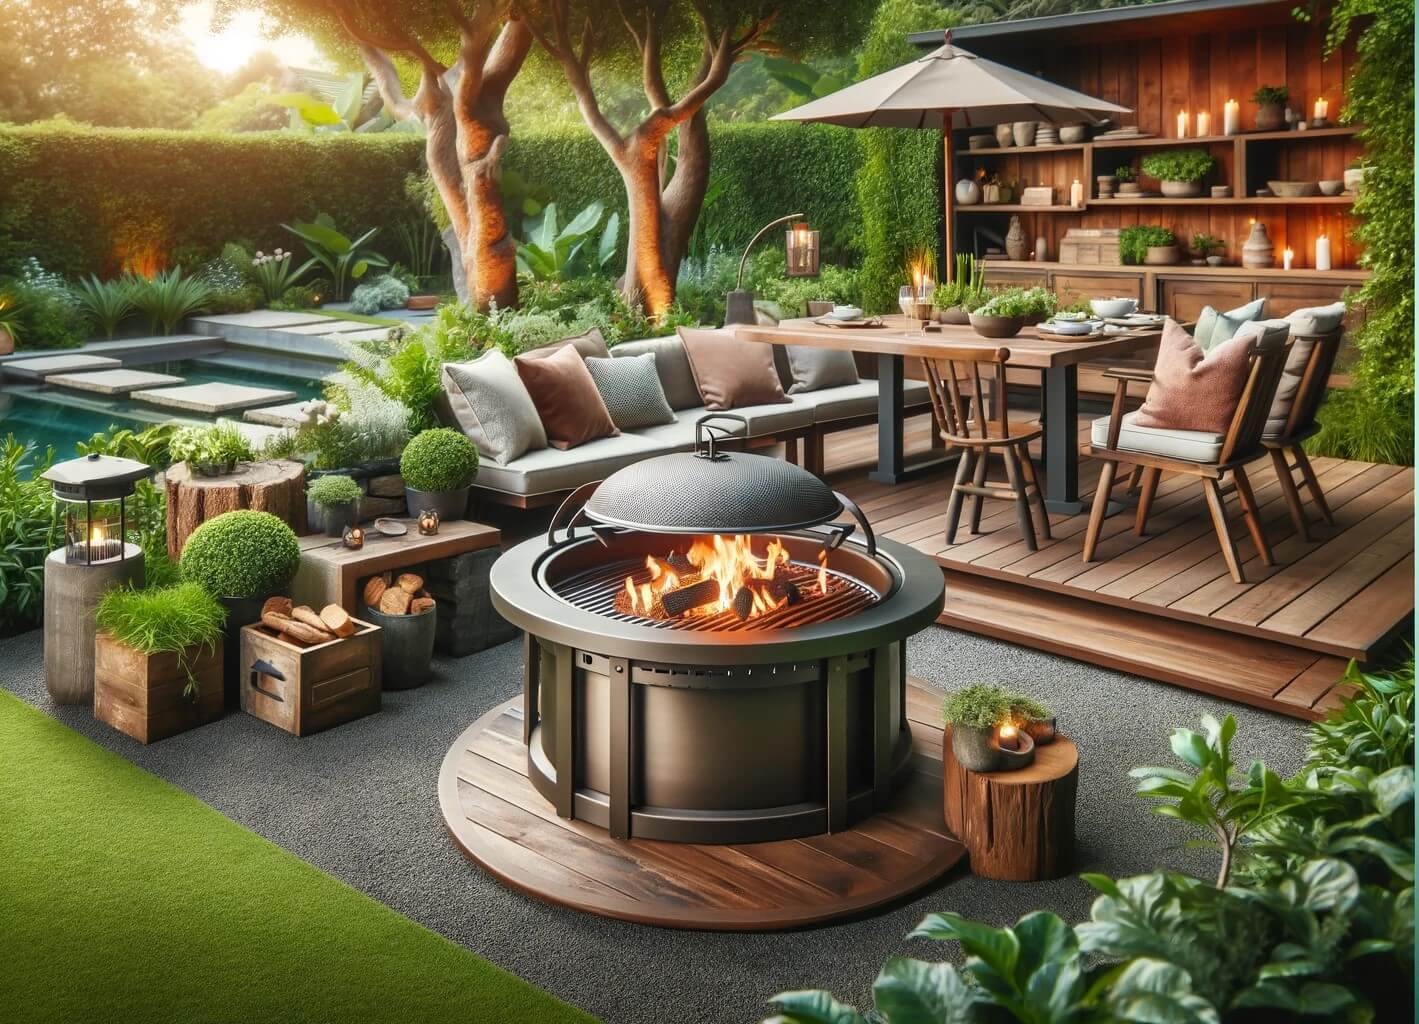 Backyard Fire Pit with Cooking Features